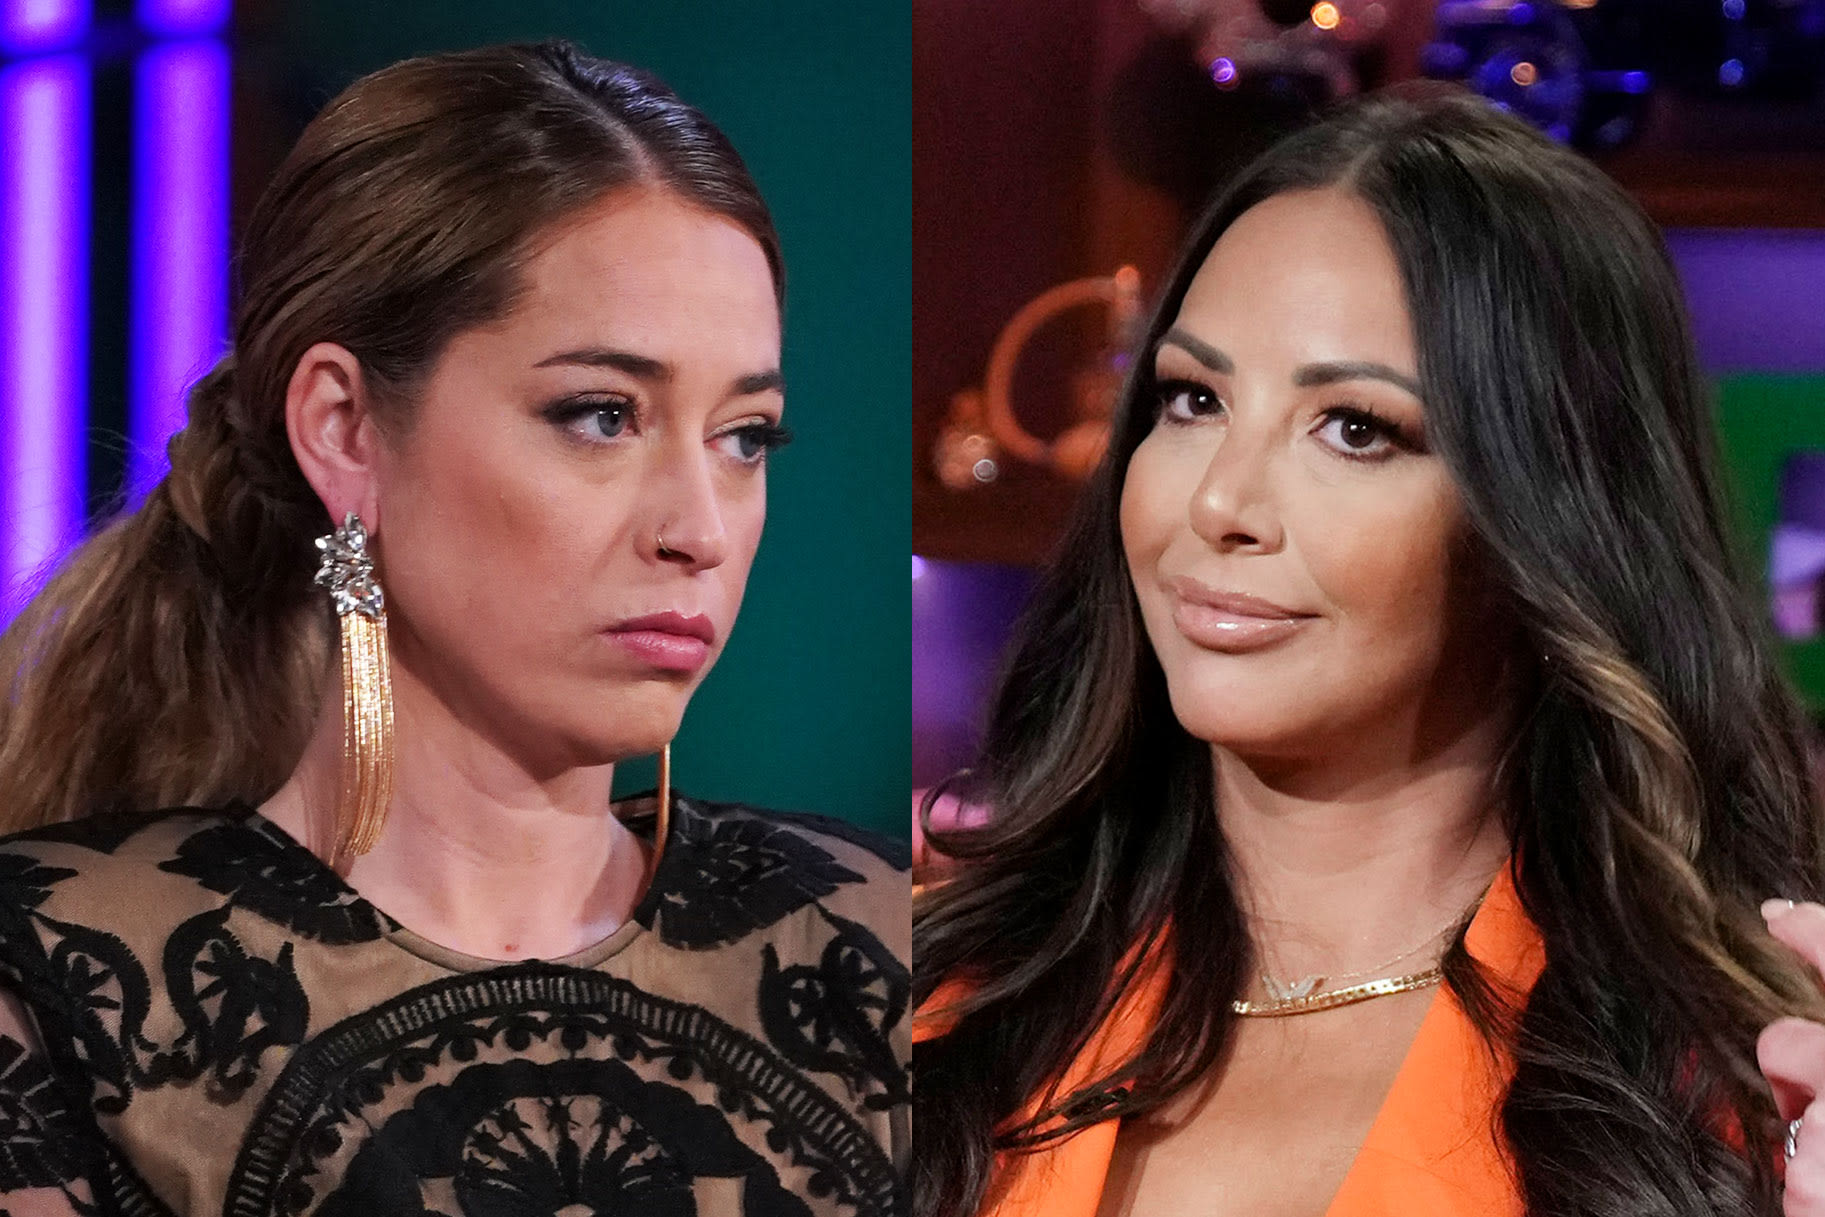 Kristen Doute Shuts Down “Liar” Jo Wenberg's Claims About Moving in With Schwartz: "Bananas" | Bravo TV Official Site